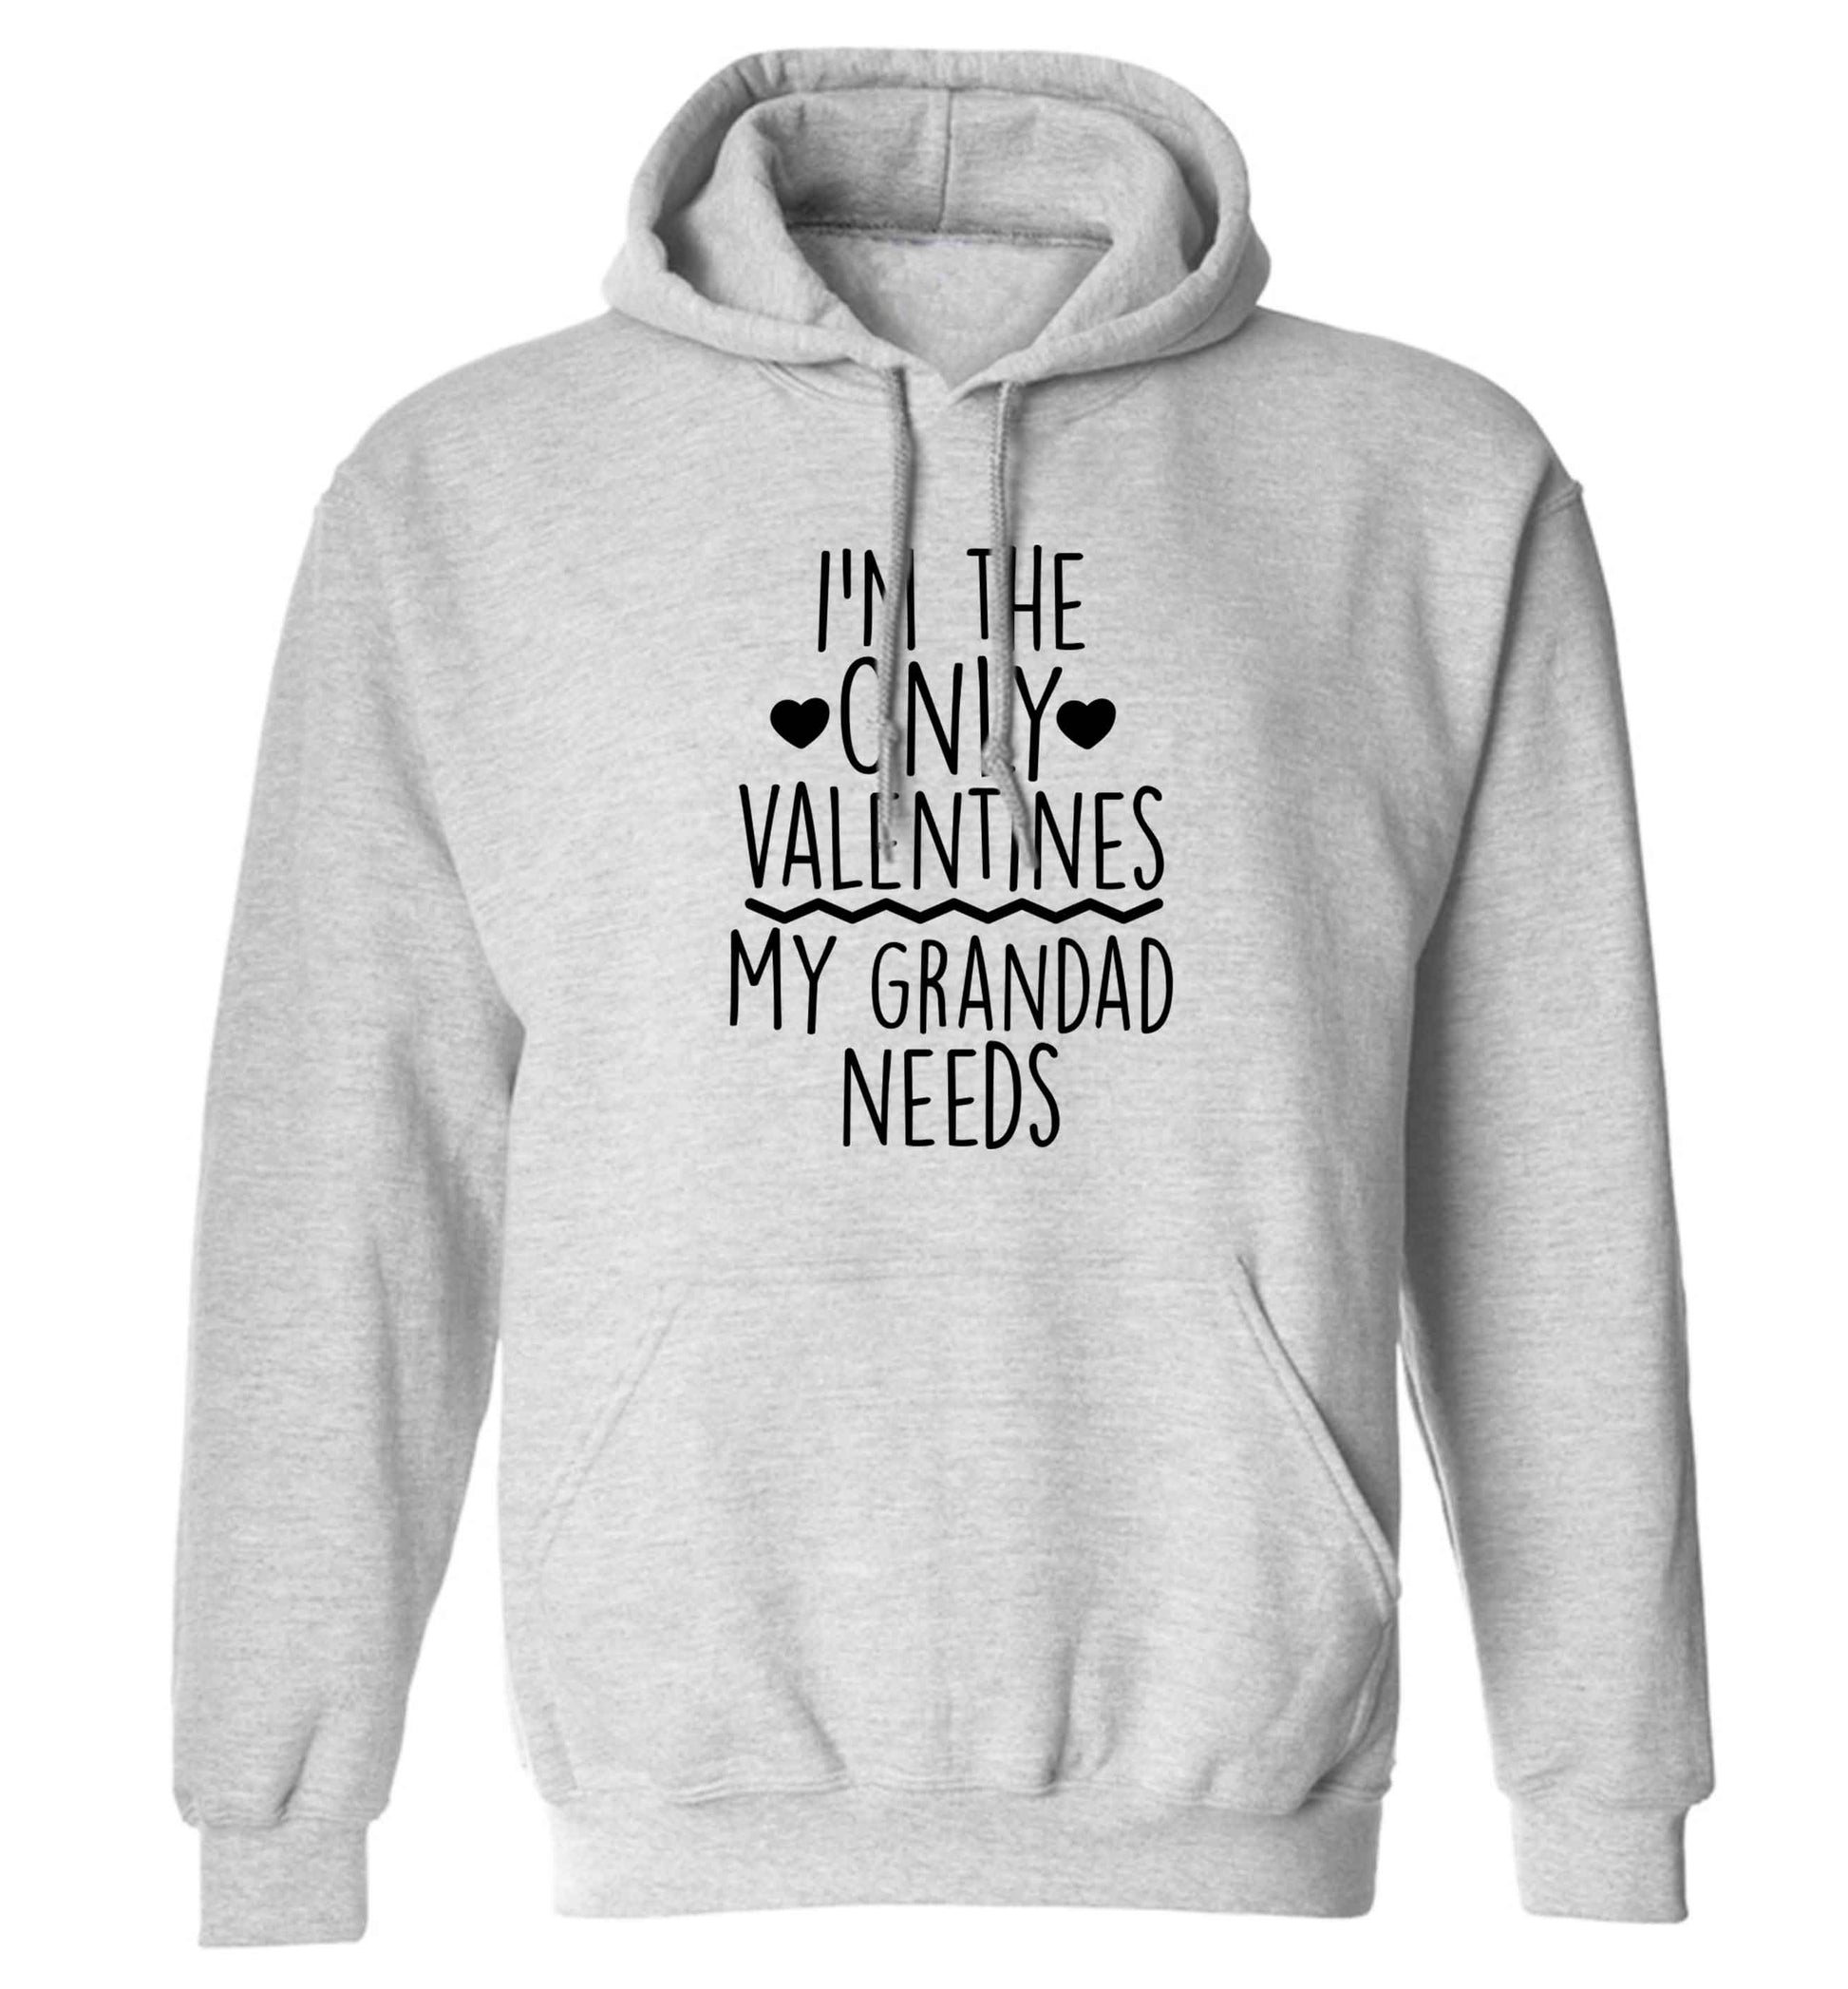 I'm the only valentines my grandad needs adults unisex grey hoodie 2XL